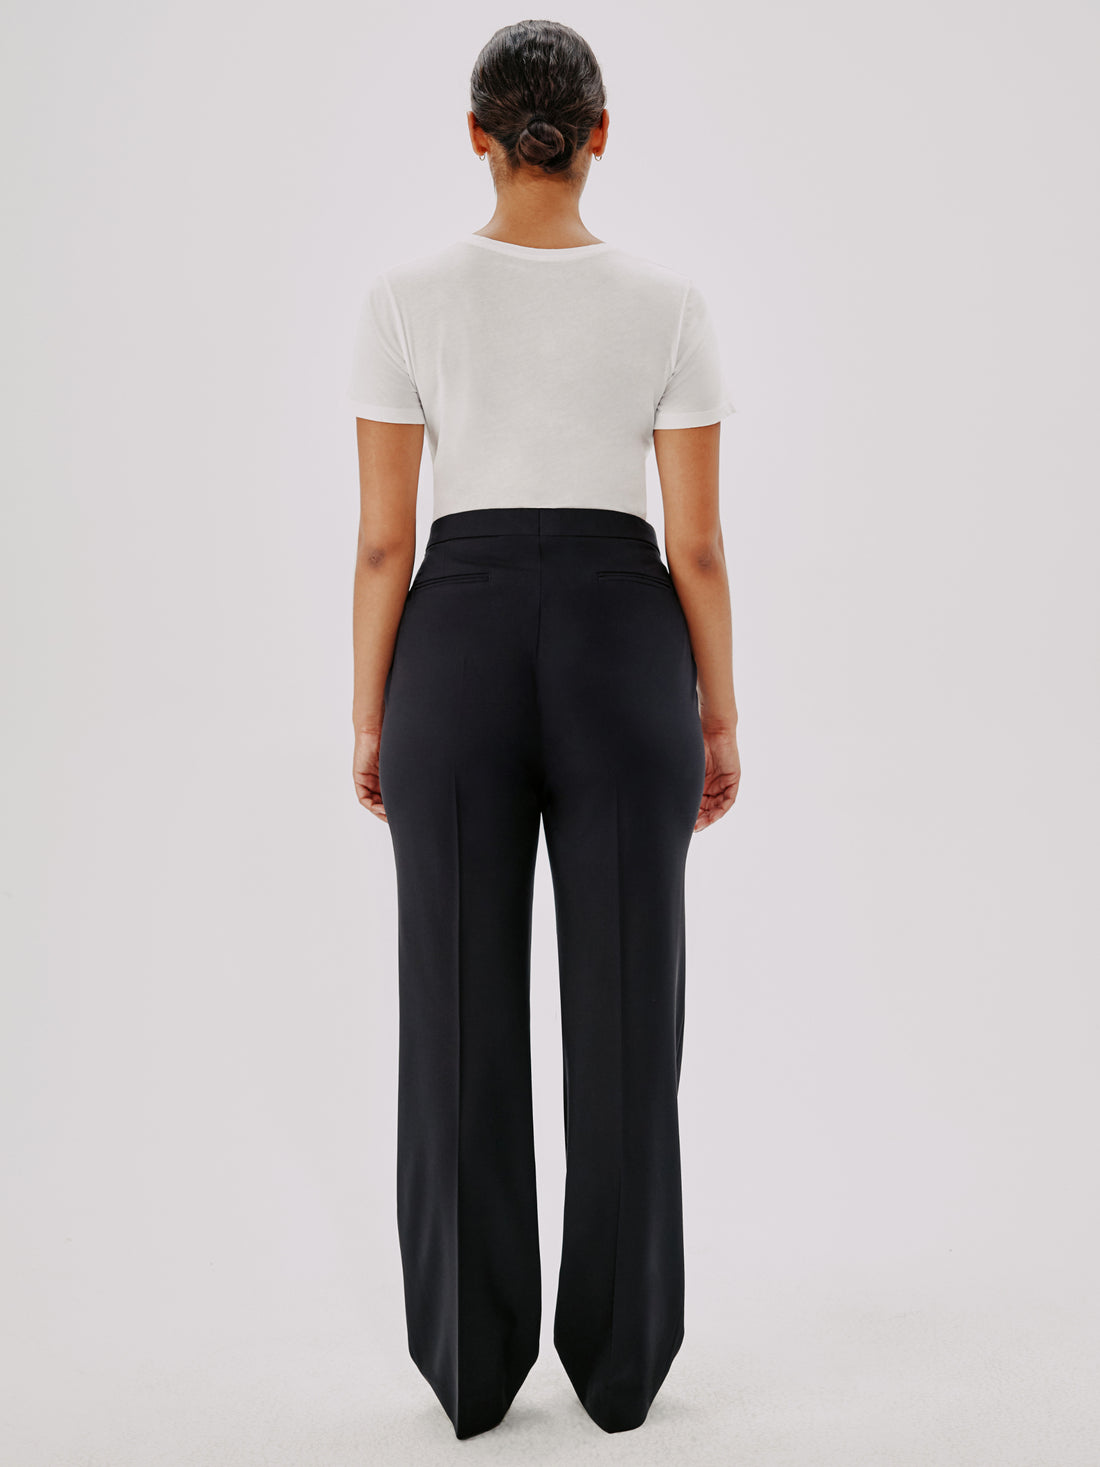 Flared Trousers - Sustainable Fashion